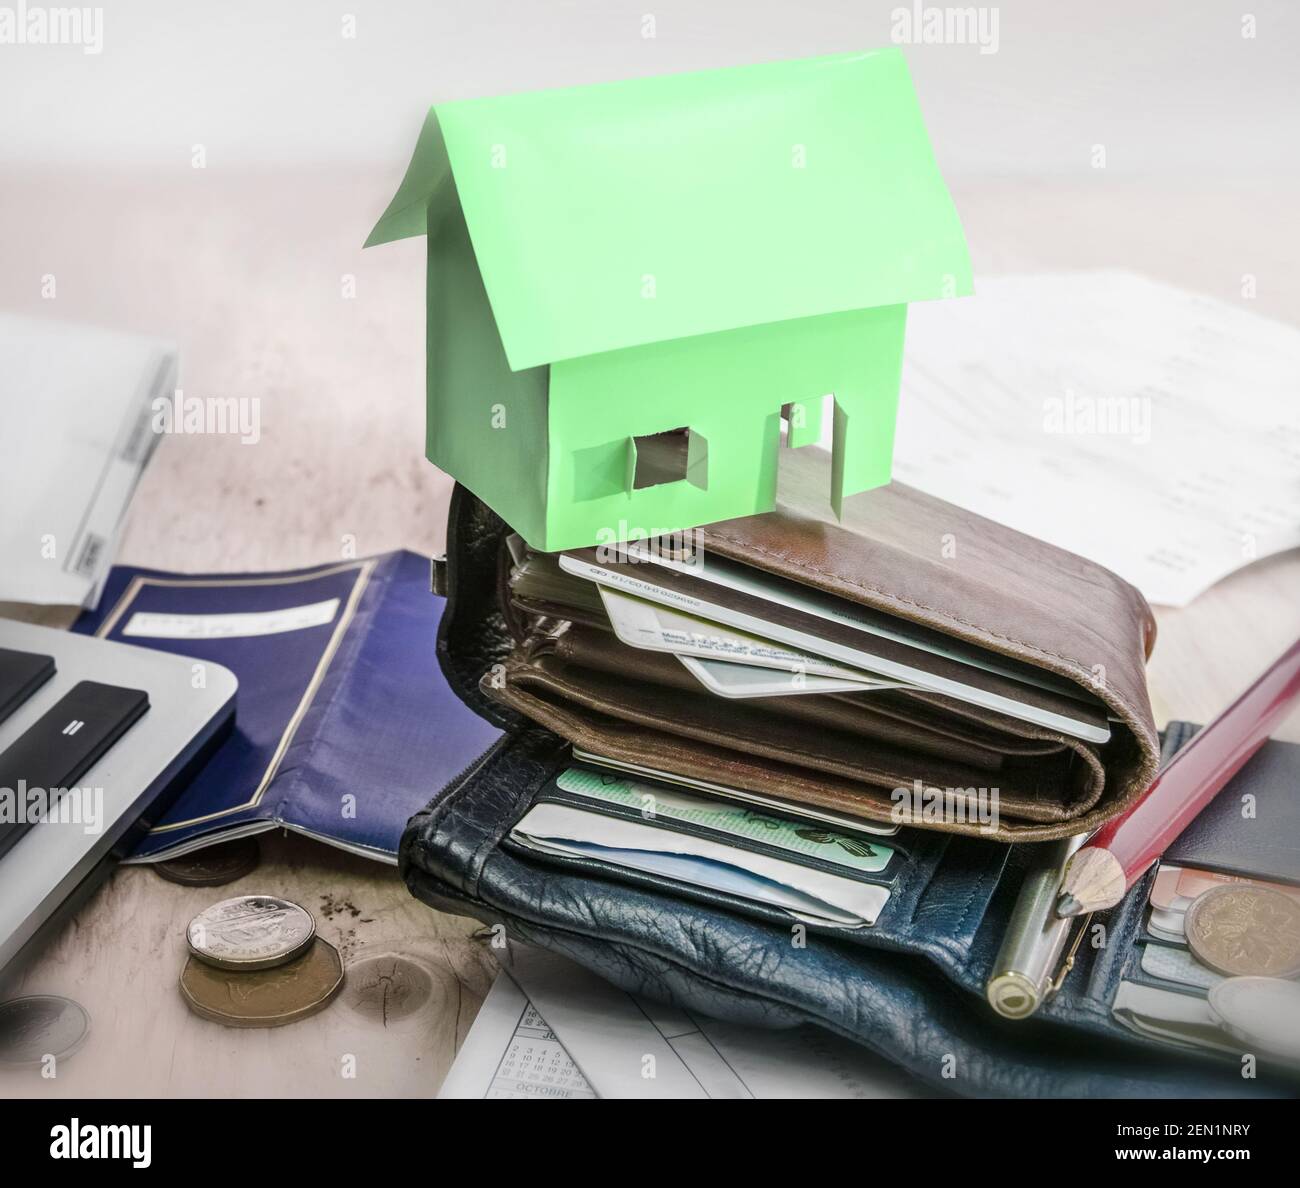 Above a stack of wallets sits a small green paper house. On the table, all around, coins, various papers, pencil and pen Stock Photo